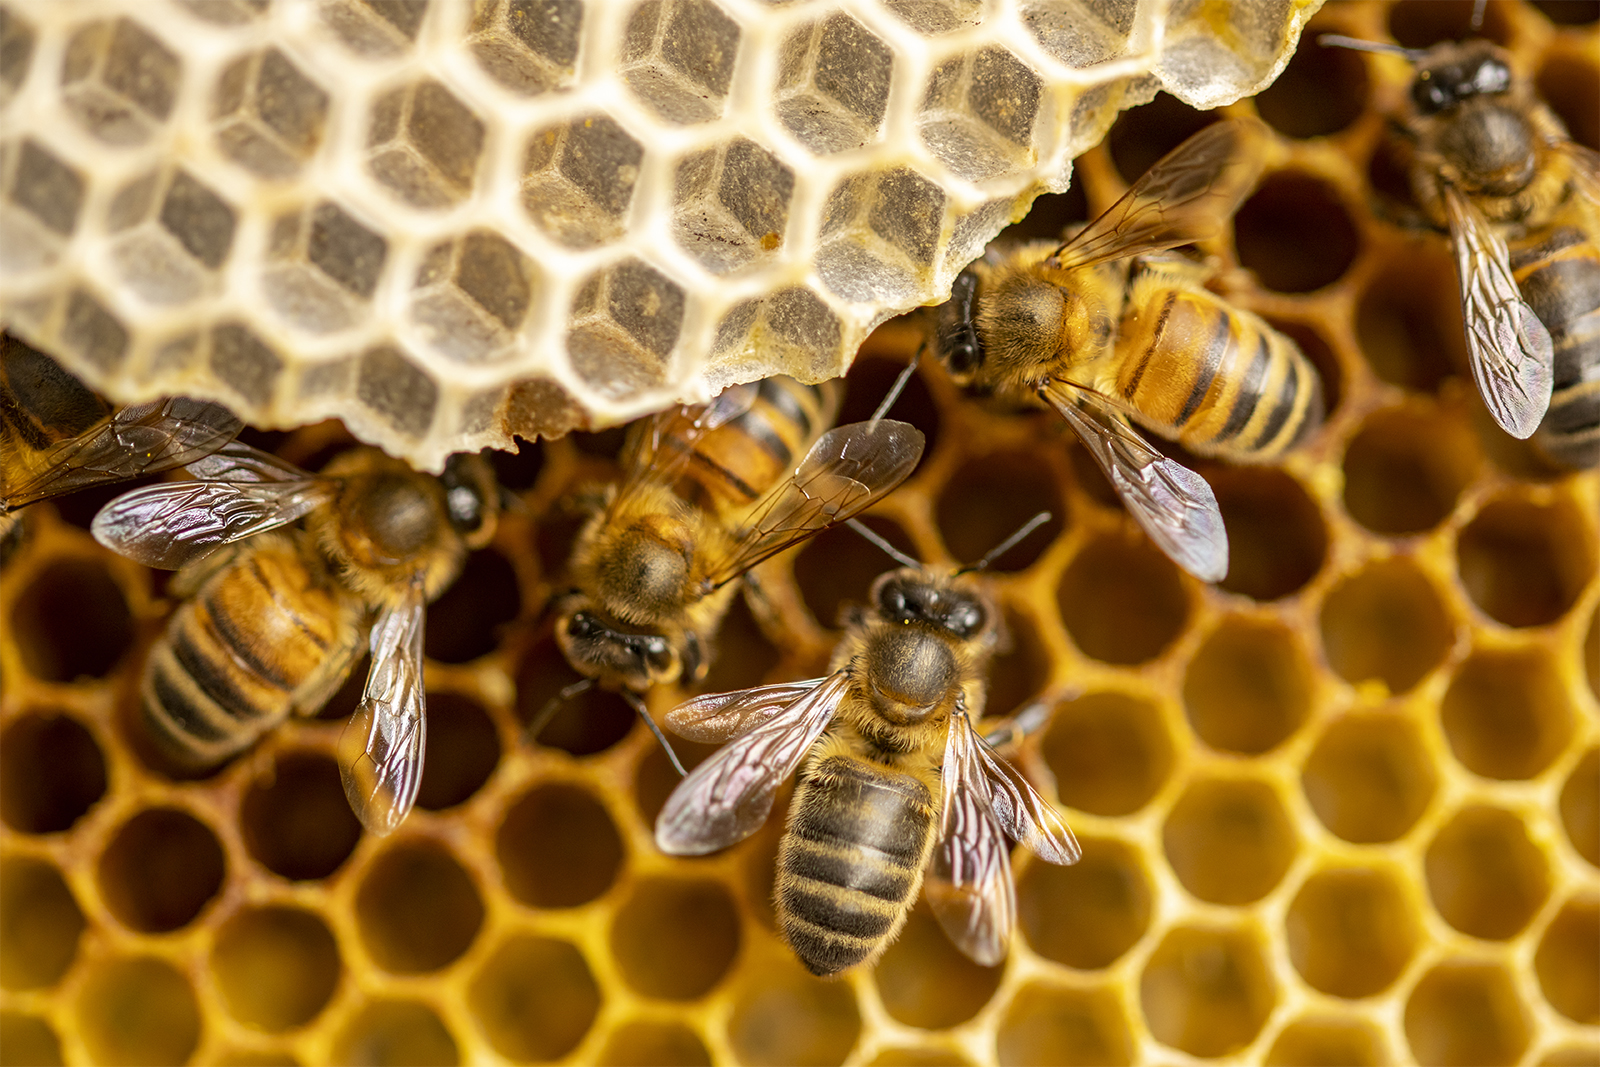 Why do bees make honey if they don't eat it?